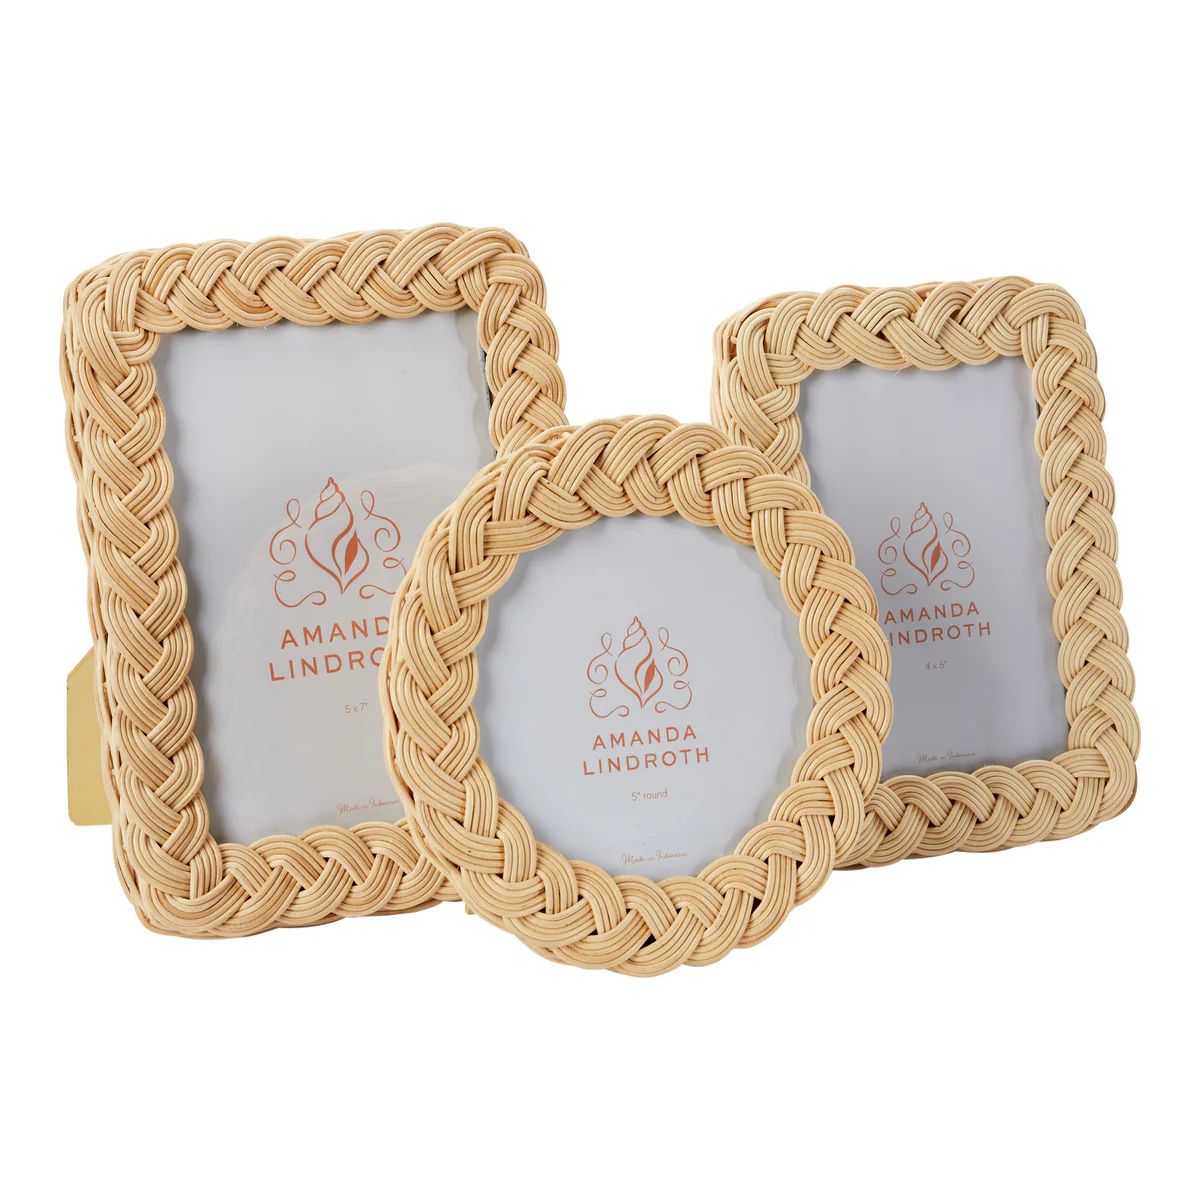 Braided Picture Frame | Amanda Lindroth